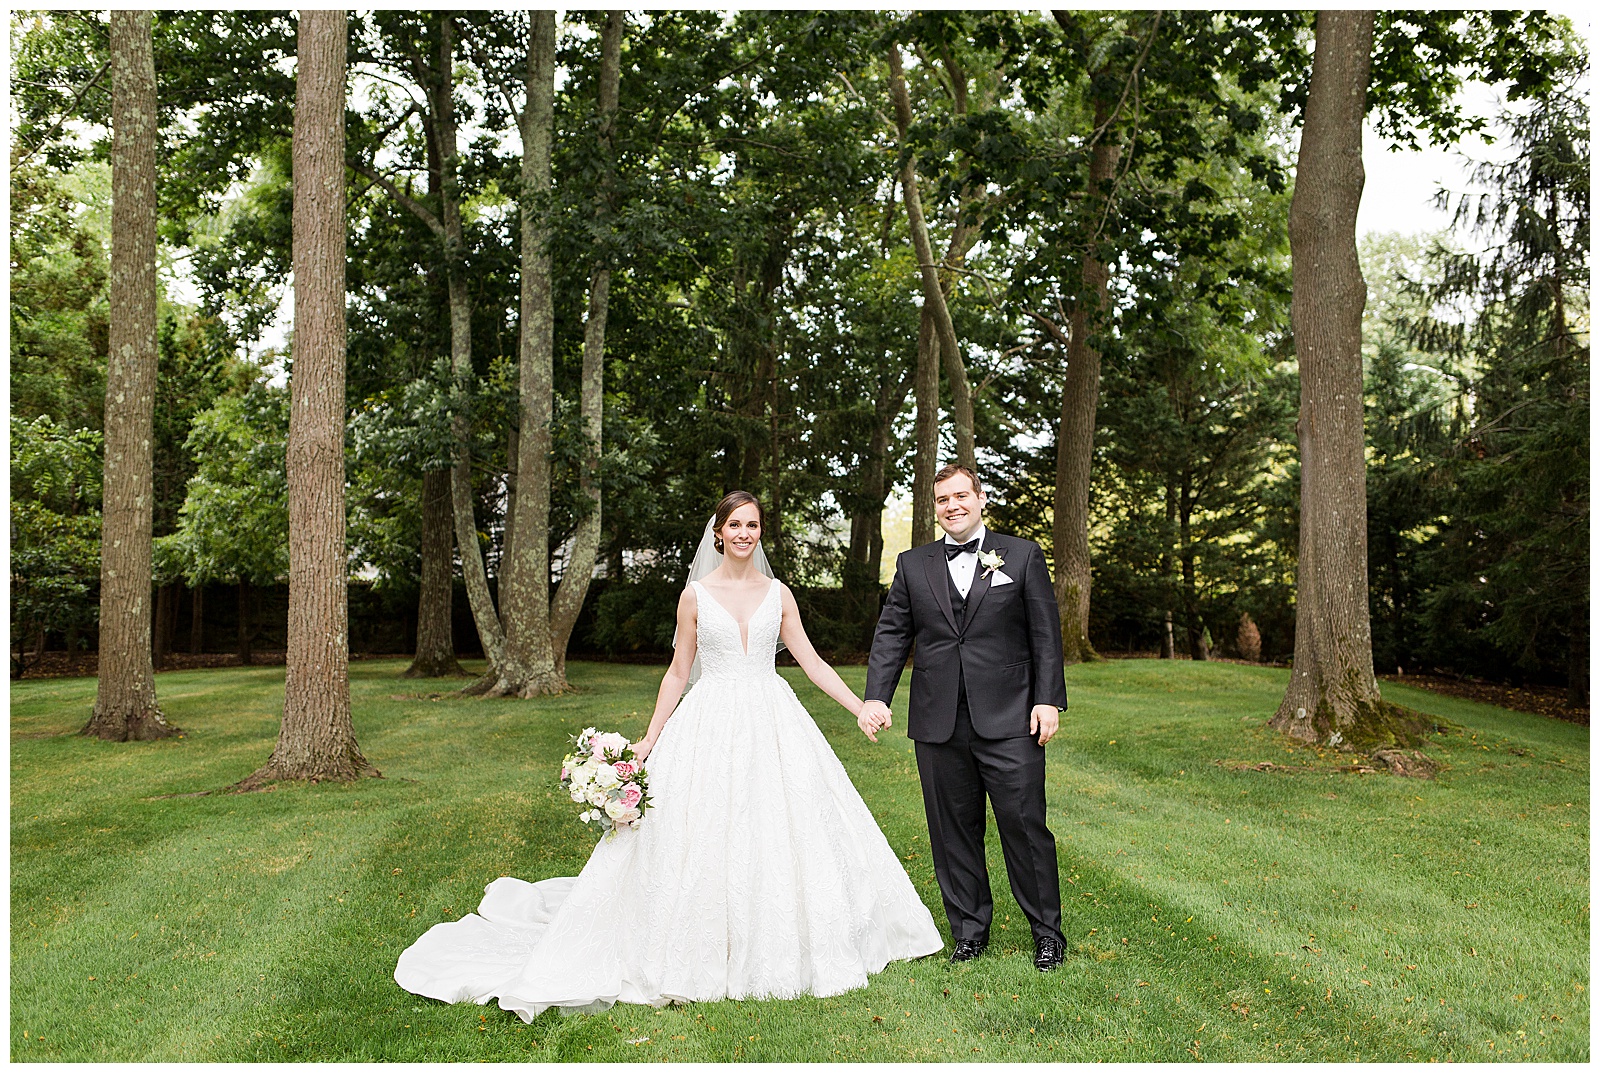 The Chanler bride and groom portraits